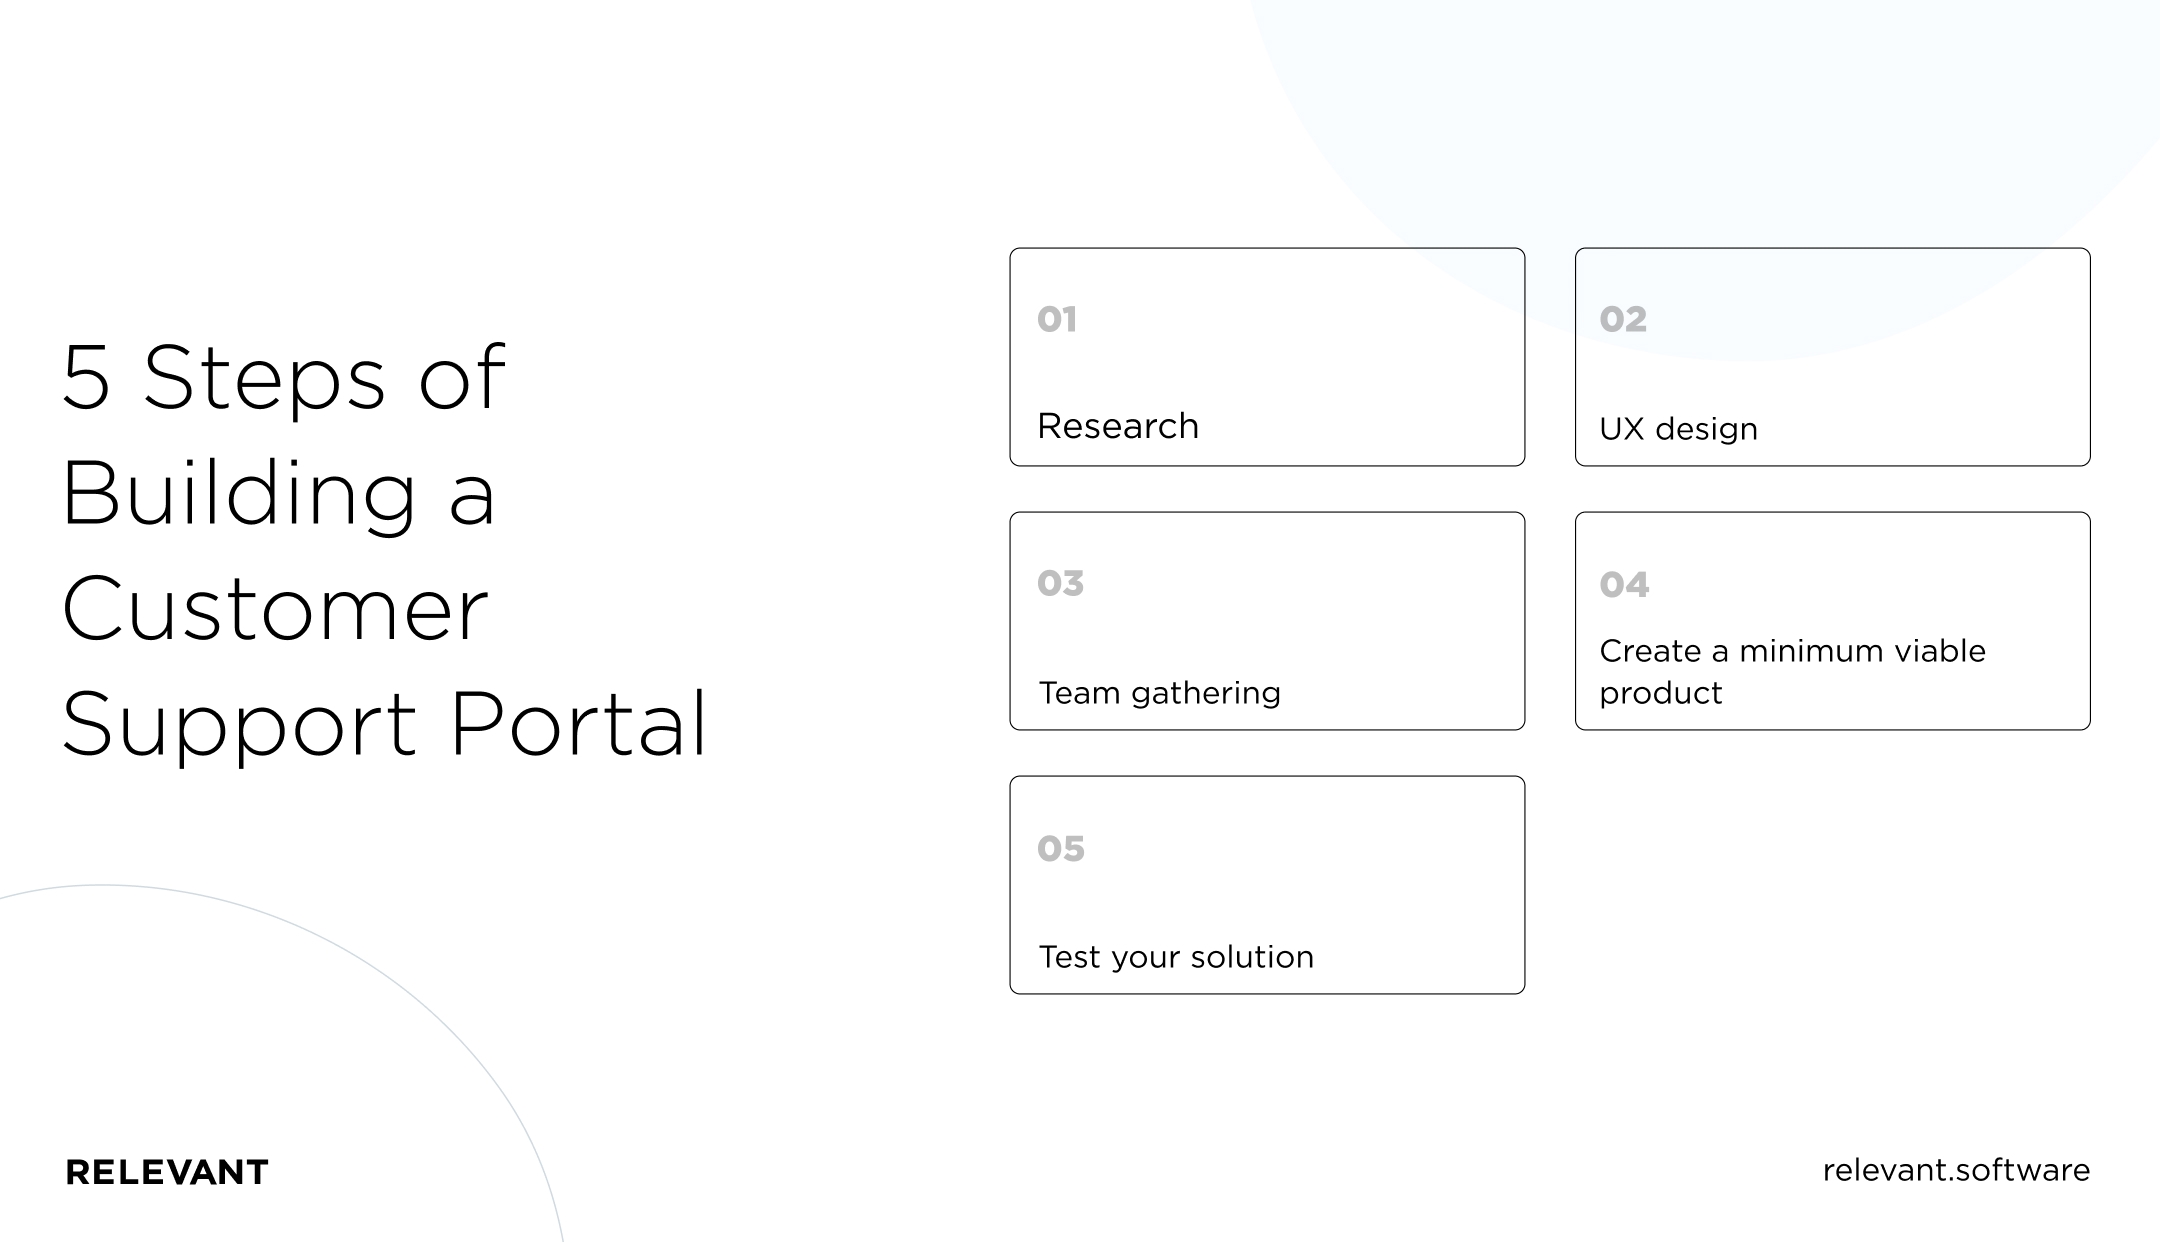 5 Steps of Building a Customer Support Portal